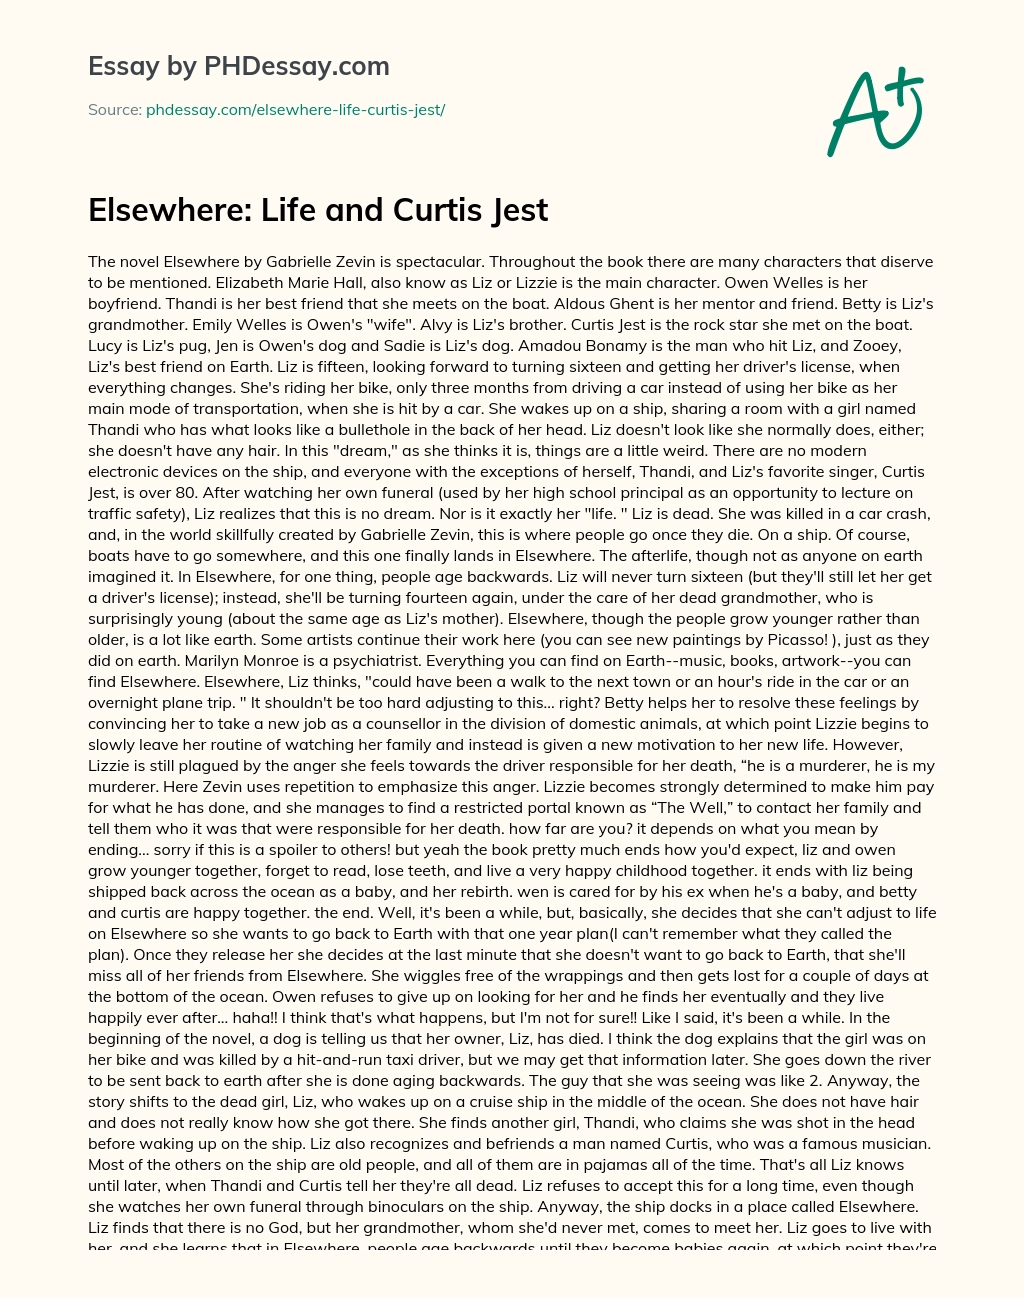 Elsewhere: Life and Curtis Jest essay